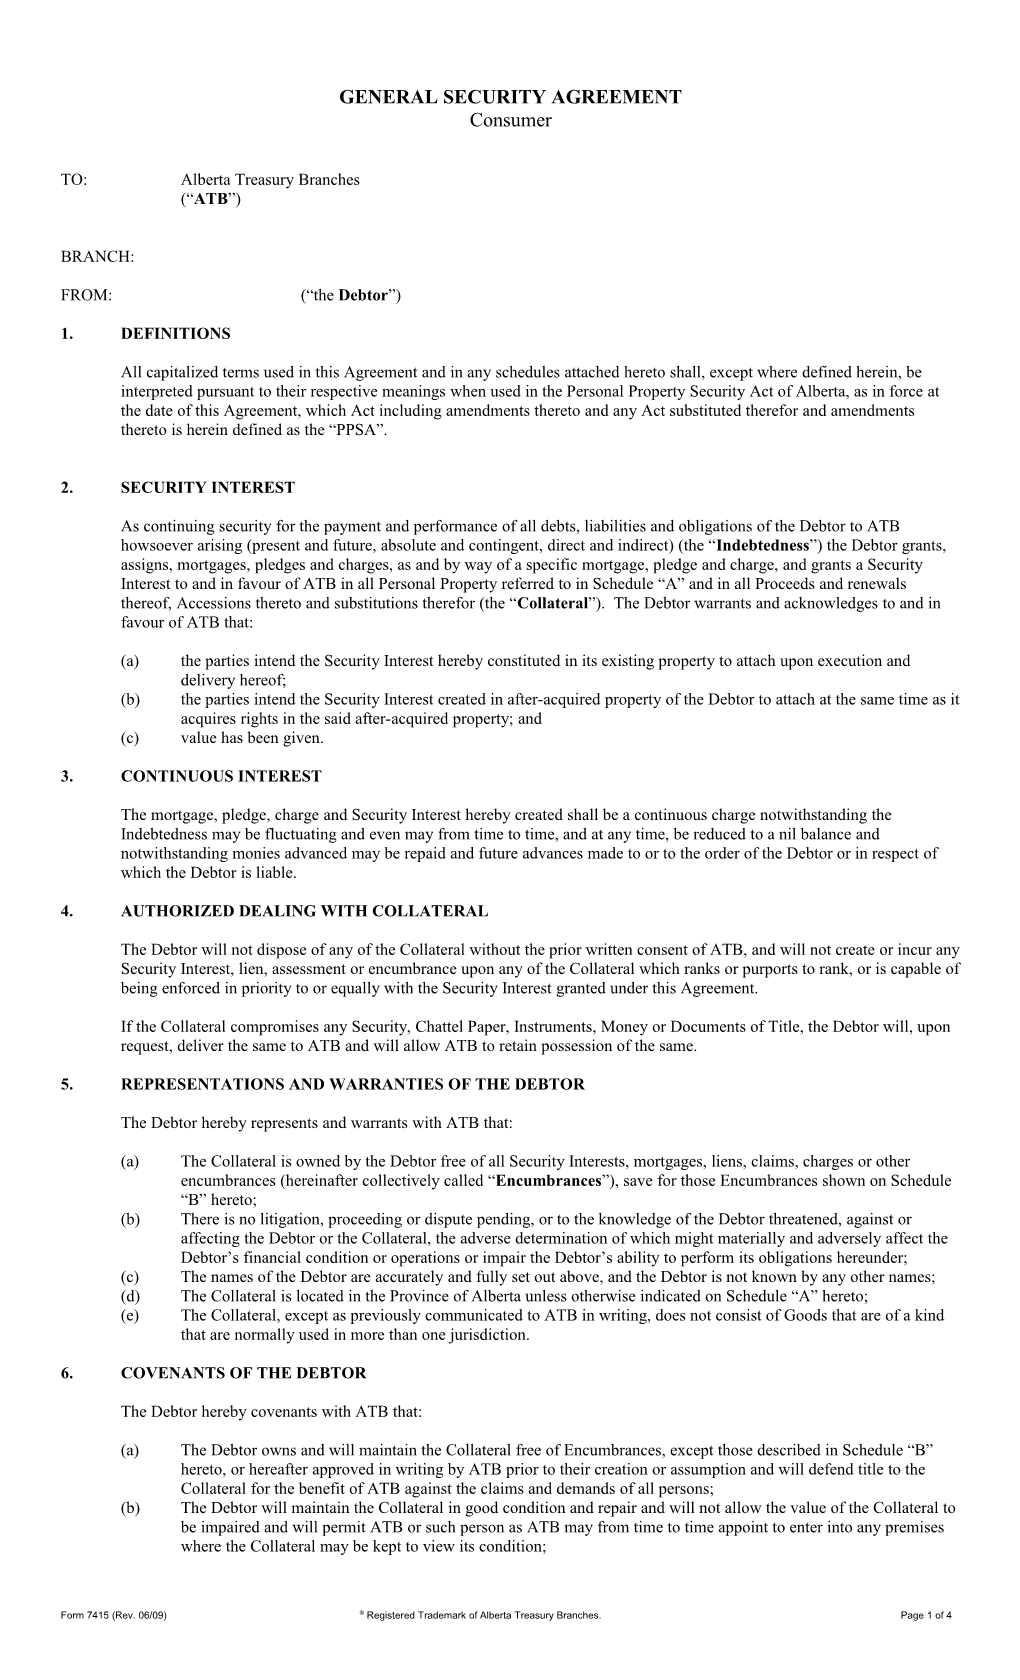 7415 - General Security Agreement - Consumer